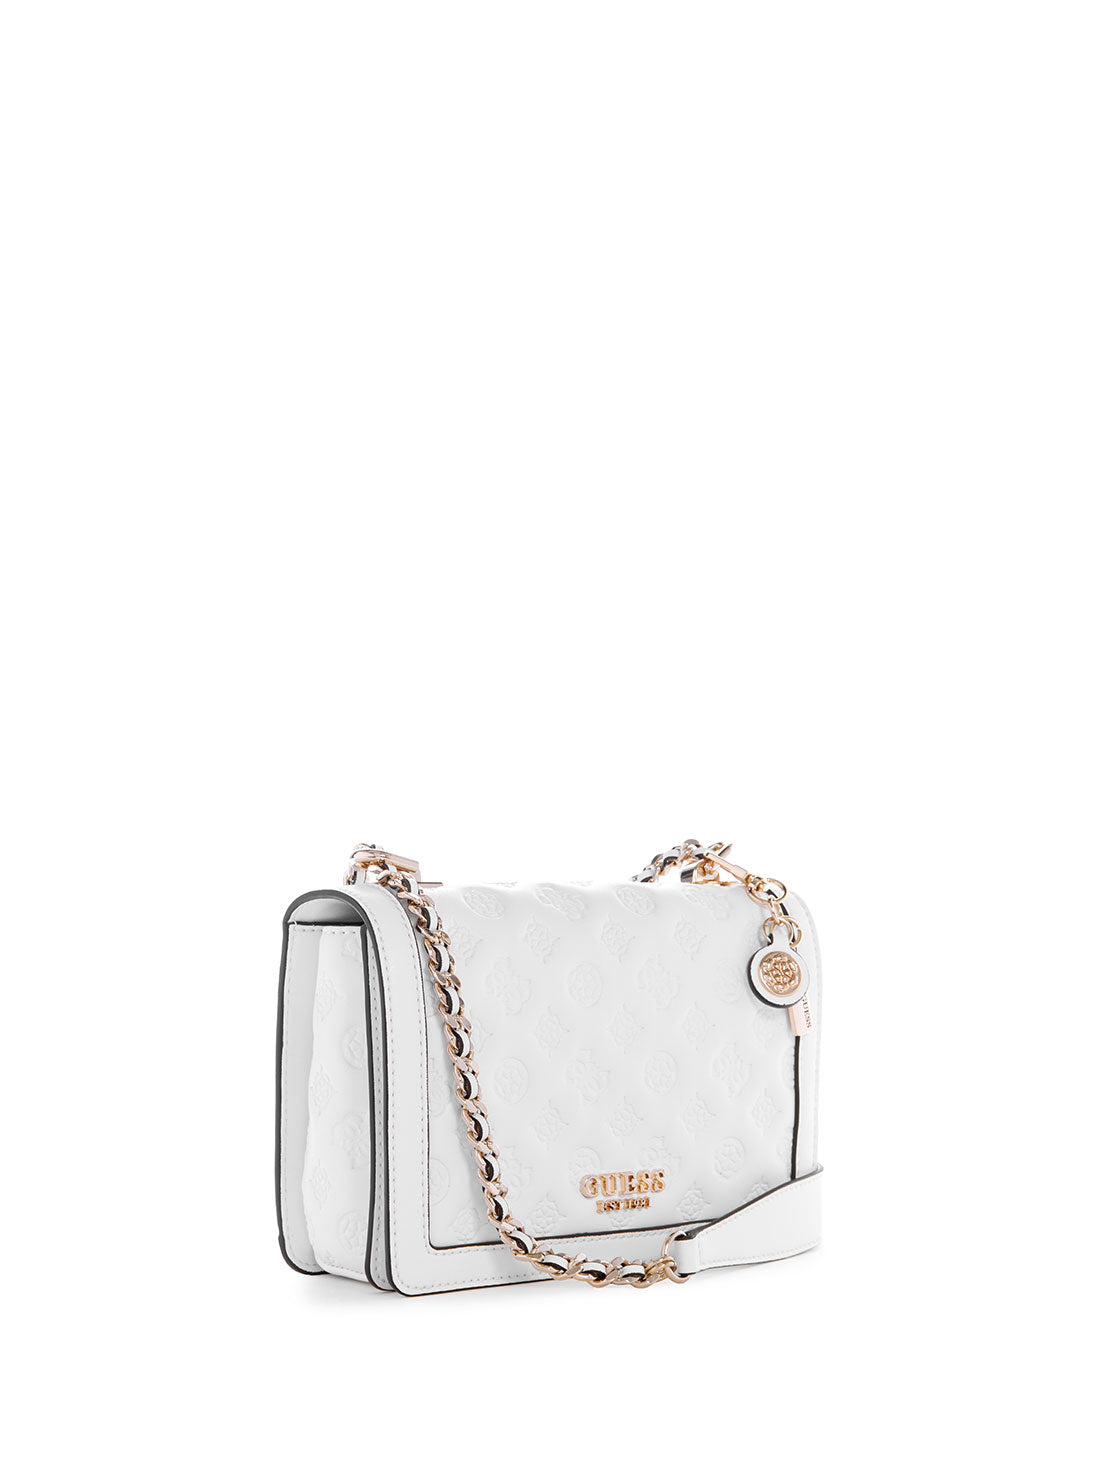 GUESS Women's White Abey Crossbody Bag PD855819 Front Side View